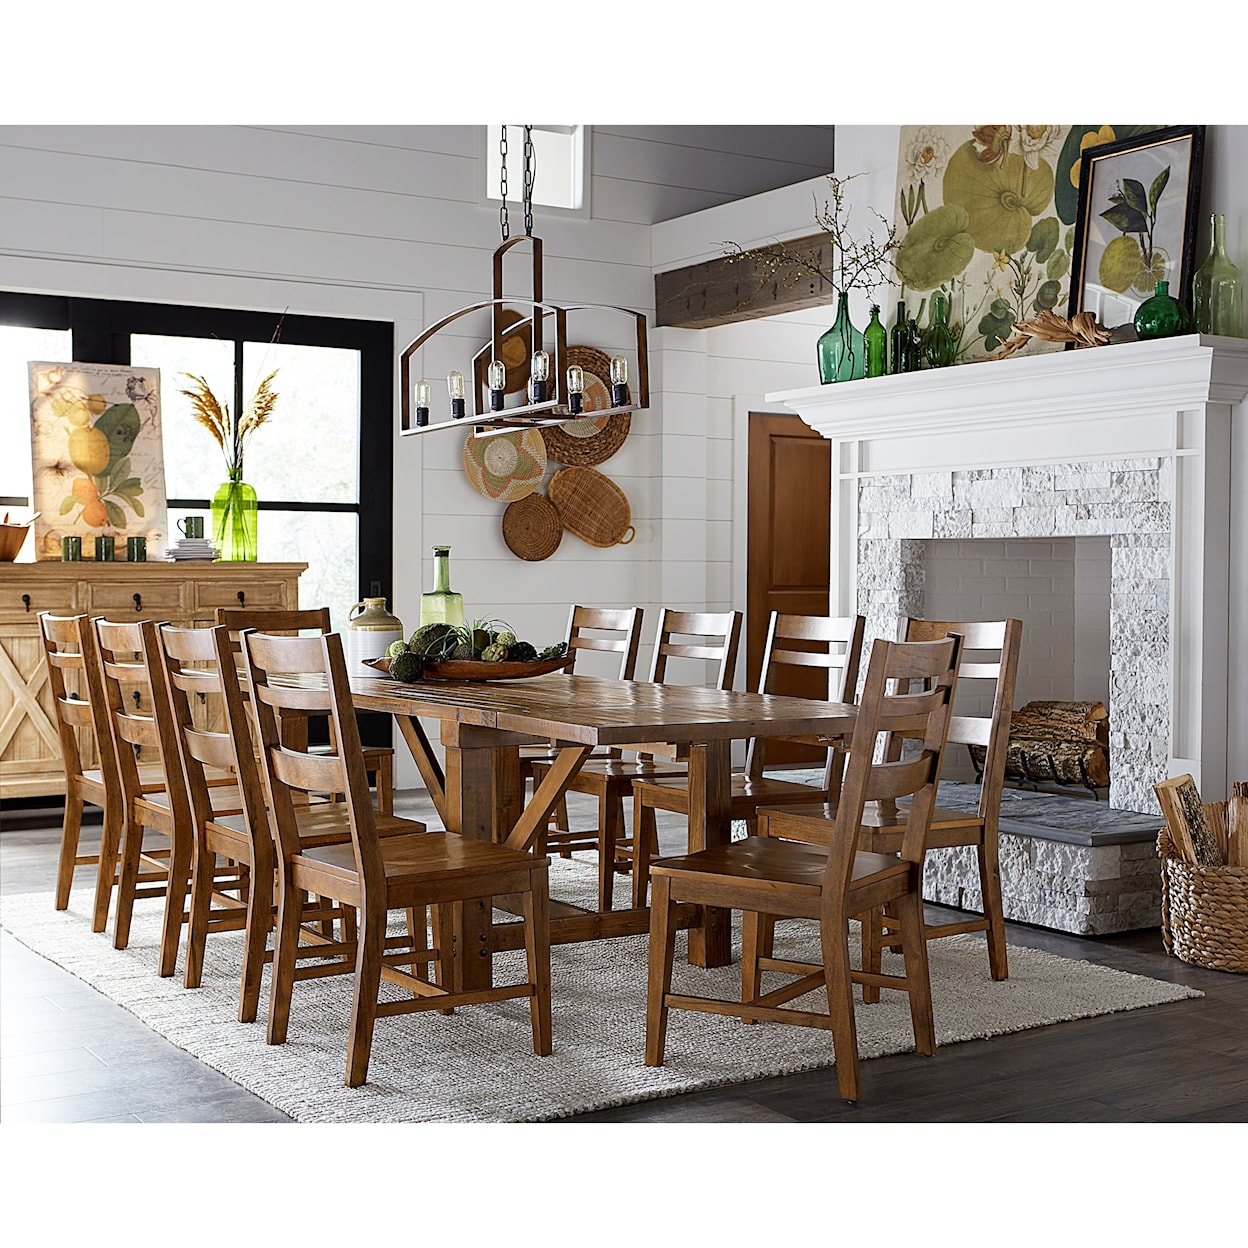 Carolina Chairs Wilder 11-Piece Table and Chair Set